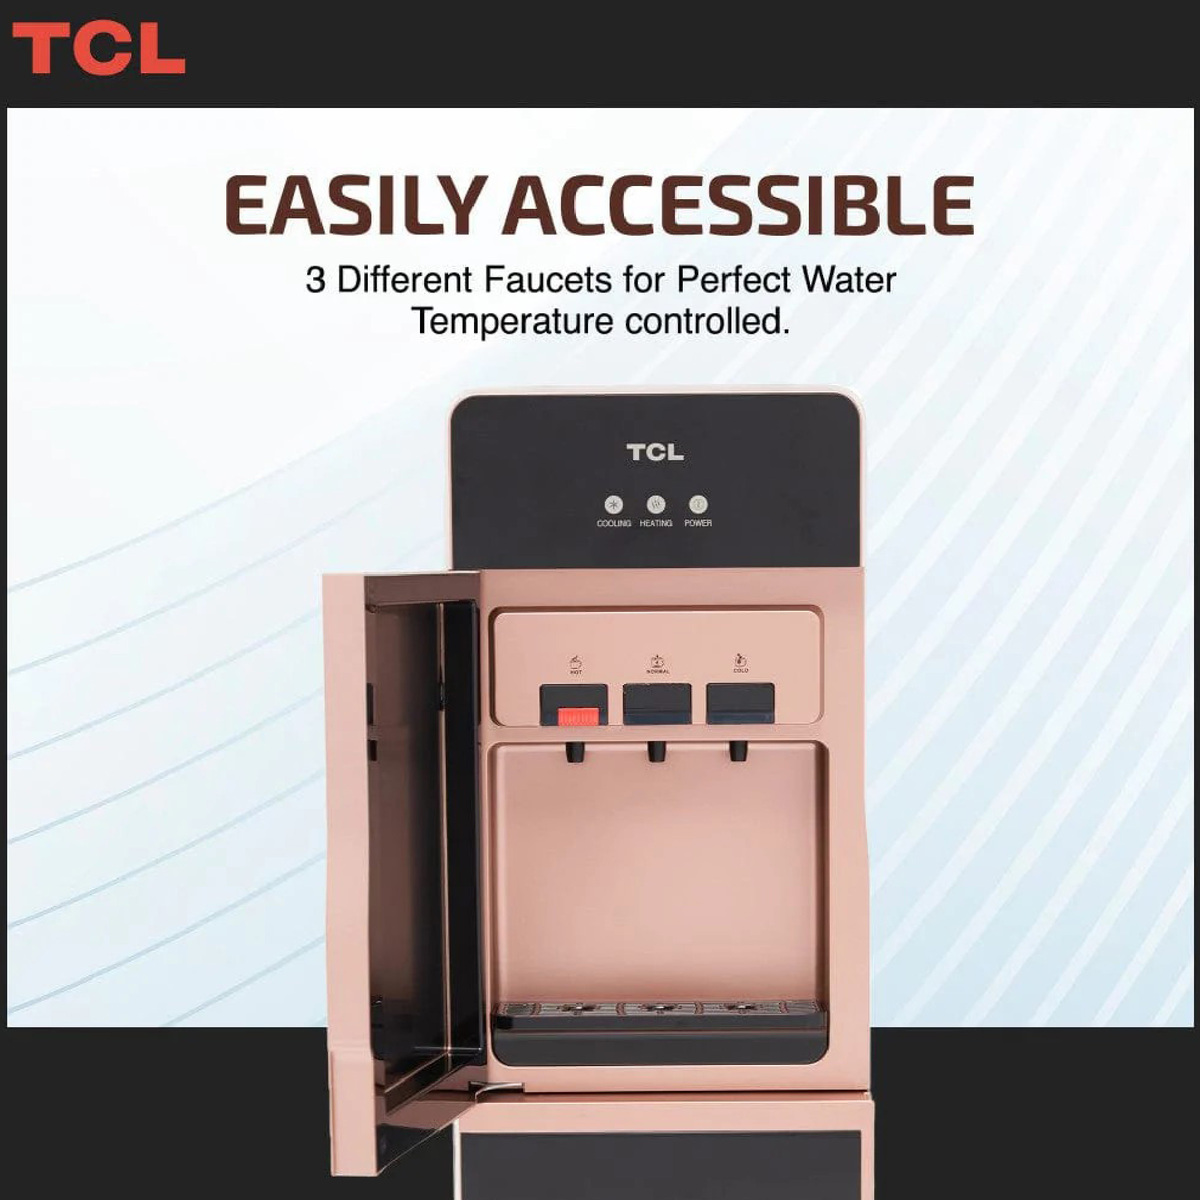 TCL Stainless Steel Top Loading 3 Tap Water Dispenser, Black, TY-LWYR85B